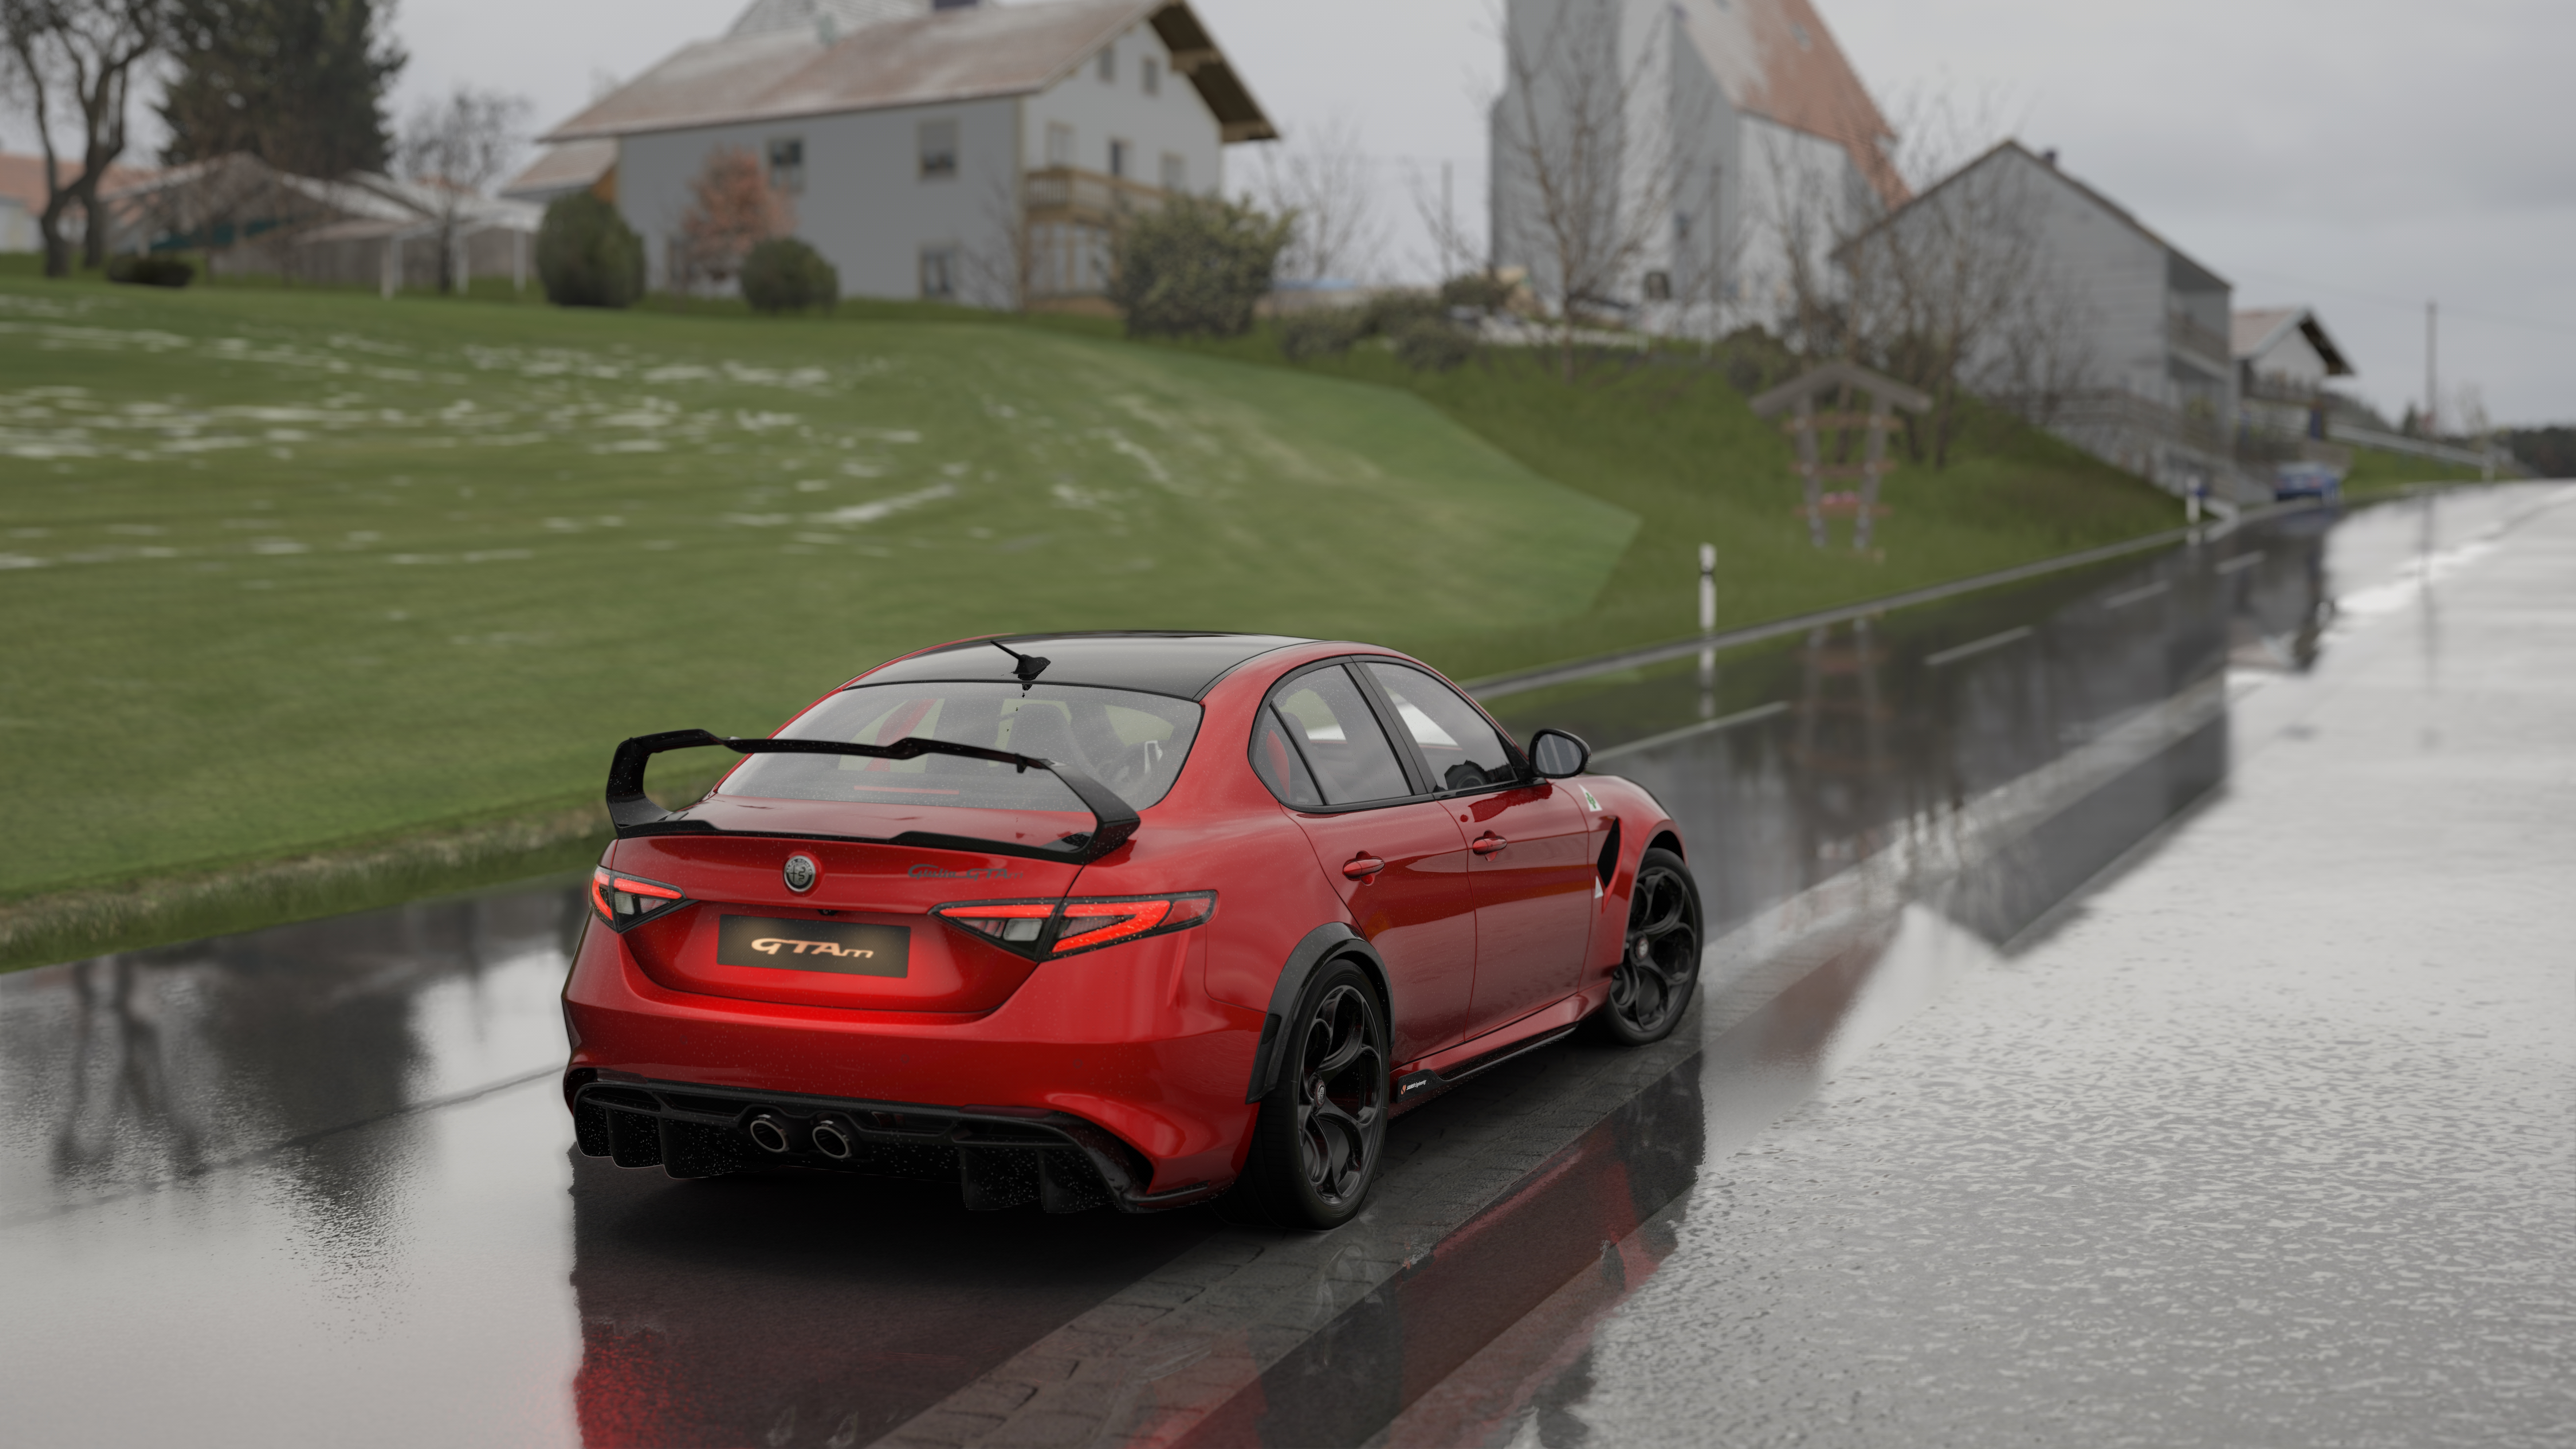 General 7680x4320 Alfa Romeo car Assetto Corsa PC gaming video game art vehicle video games rear view red cars taillights wet wet road CGI reflection building